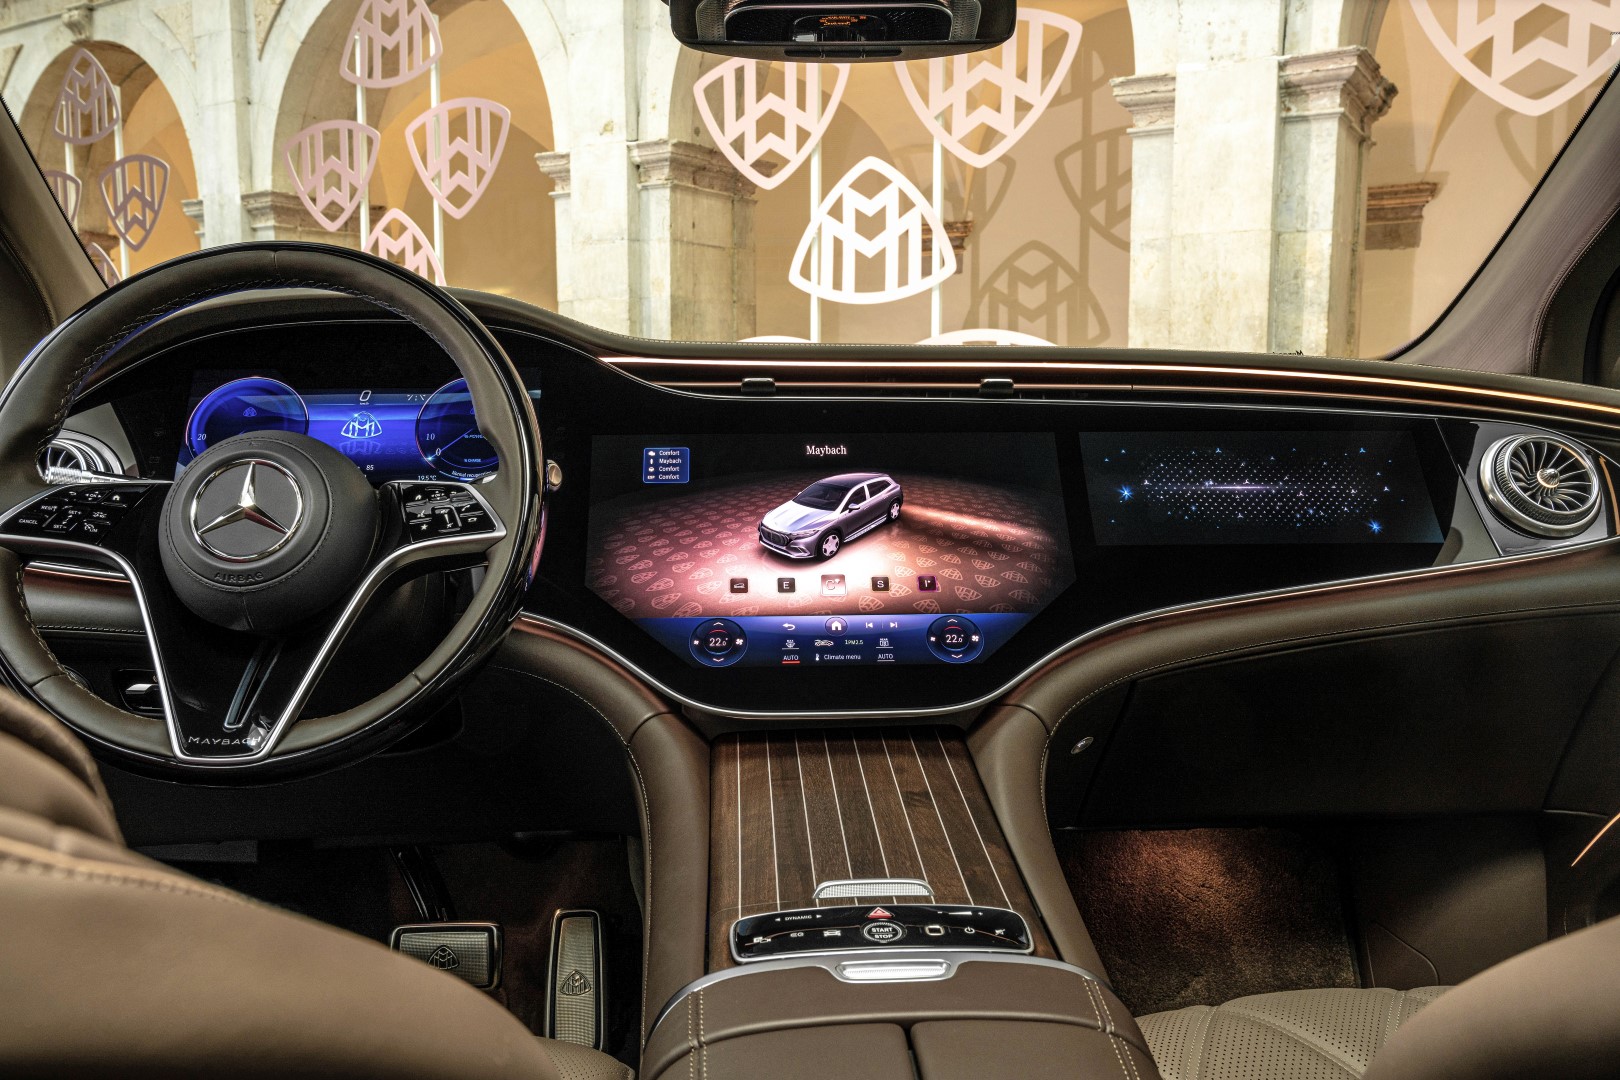 The Mercedes-Maybach EQS 680 is probably the most baller EV in the world right now